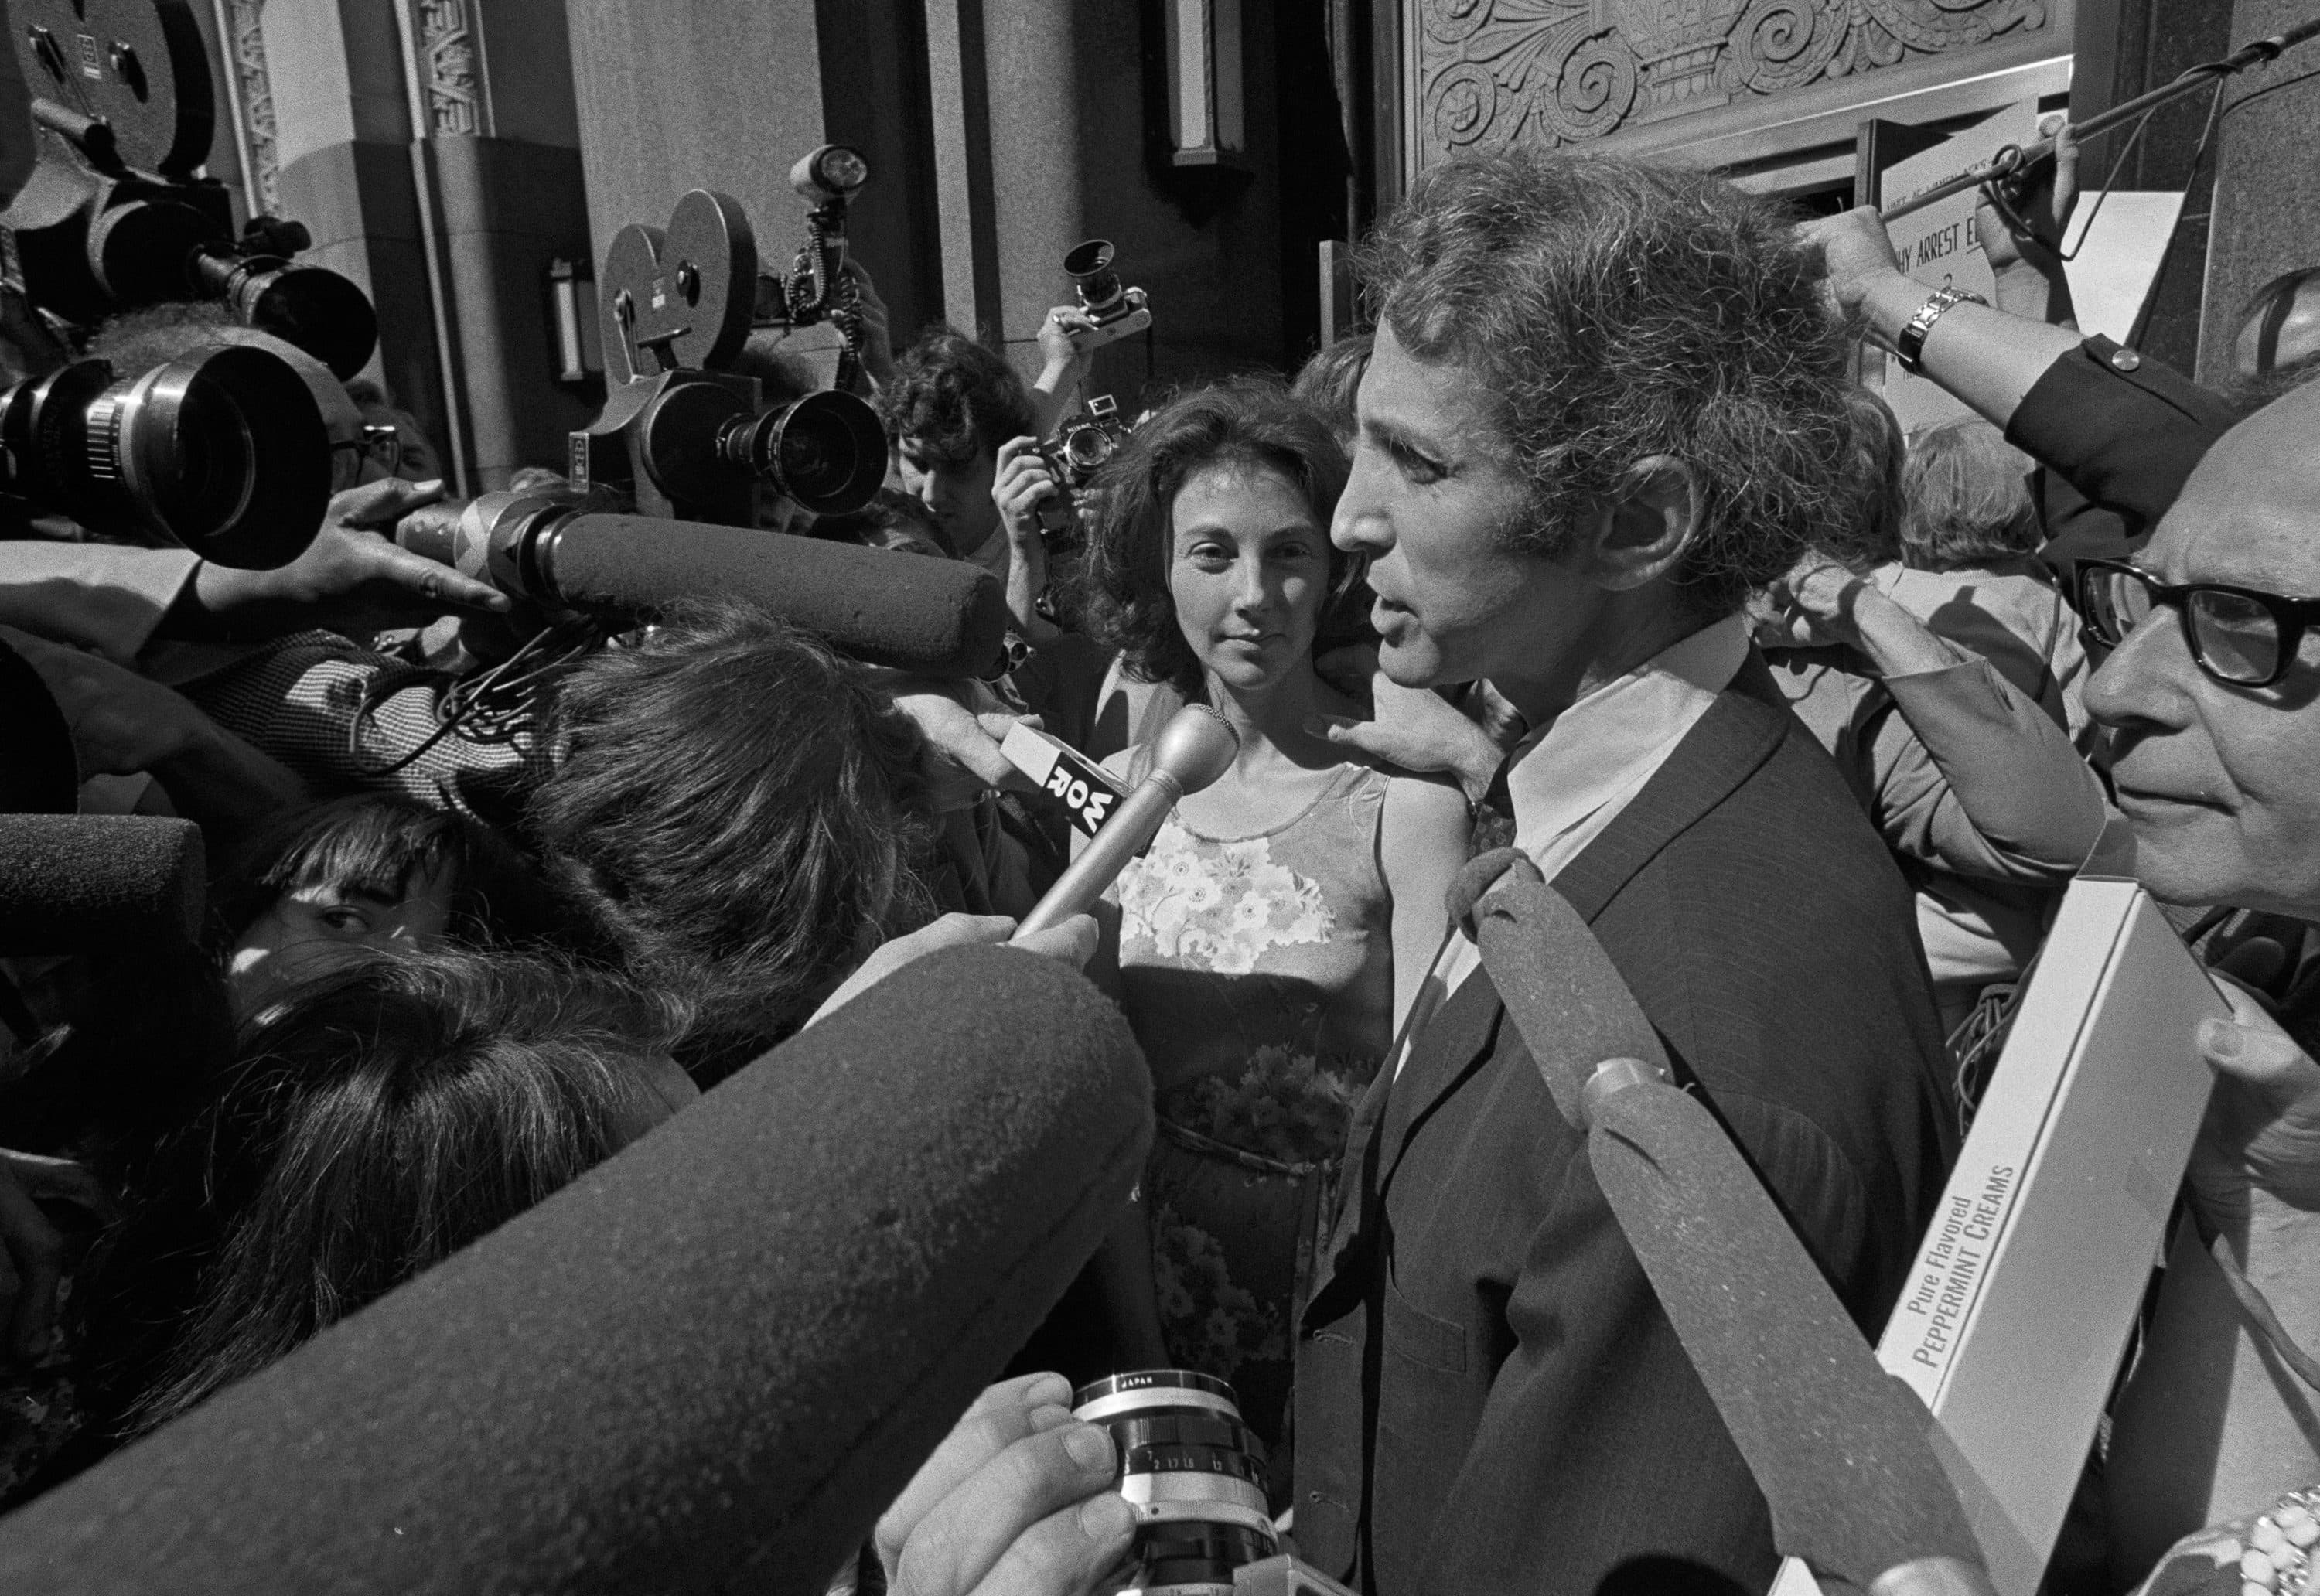 Daniel Ellsberg, with his wife, talks to reporters outside the Boston federal building on June 28, 1971. Ellsberg, charged in federal warrants with unauthorized possession of top secret documents and failure to return them, arrived to surrender himself to the U.S. Attorney. (AP File Photo)